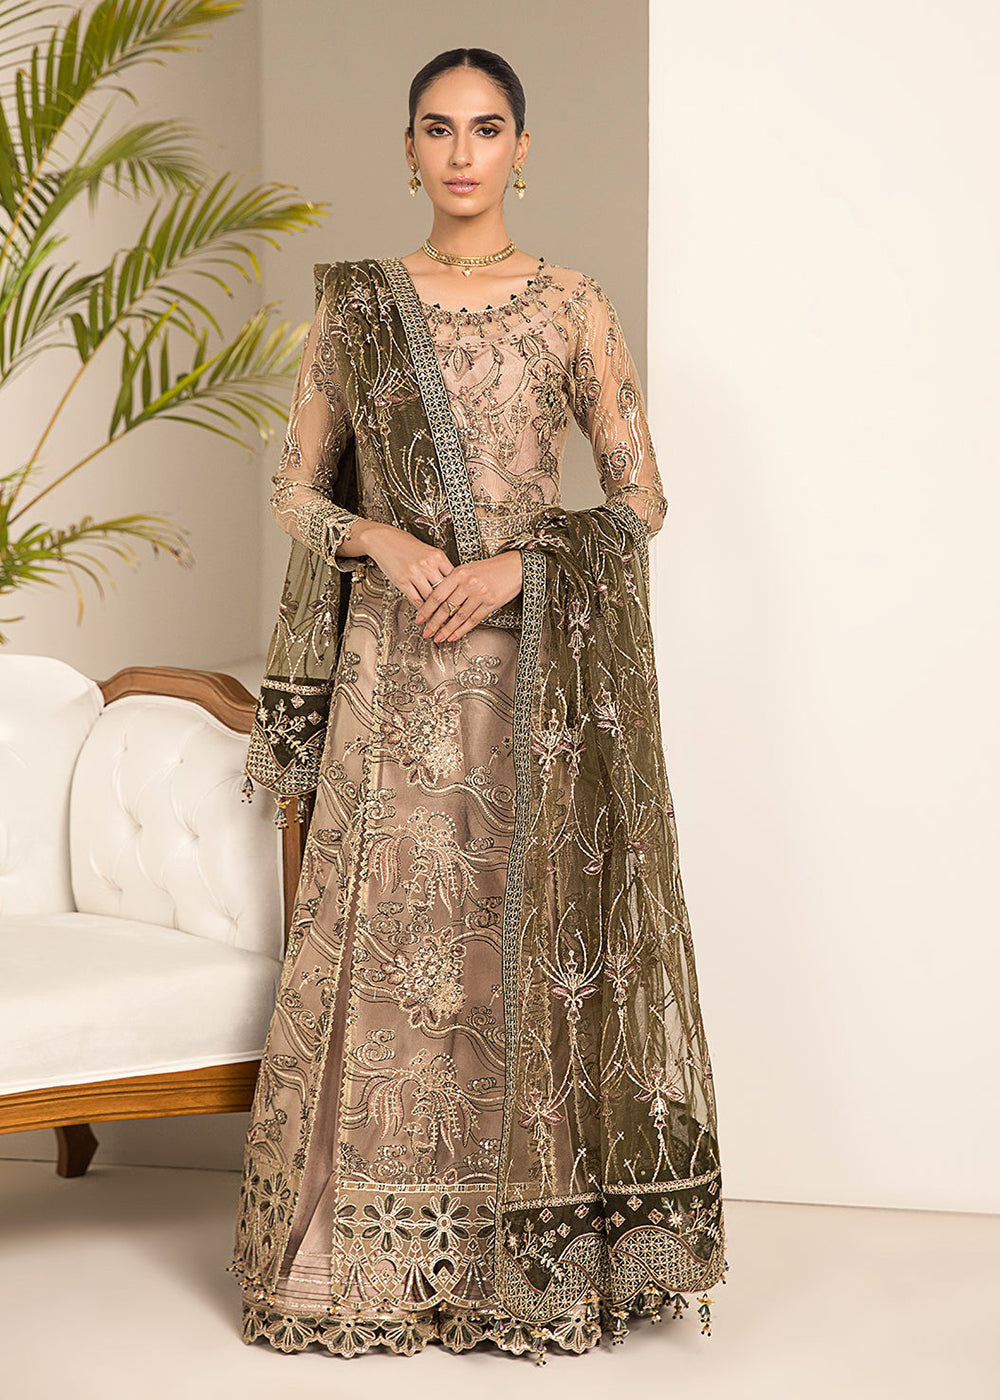 Shop Now Latest Design Wedding, Bridal & Party Wear Pakistani Sharara Suits Online in USA, UK, Canada & Worldwide at Empress Clothing. 